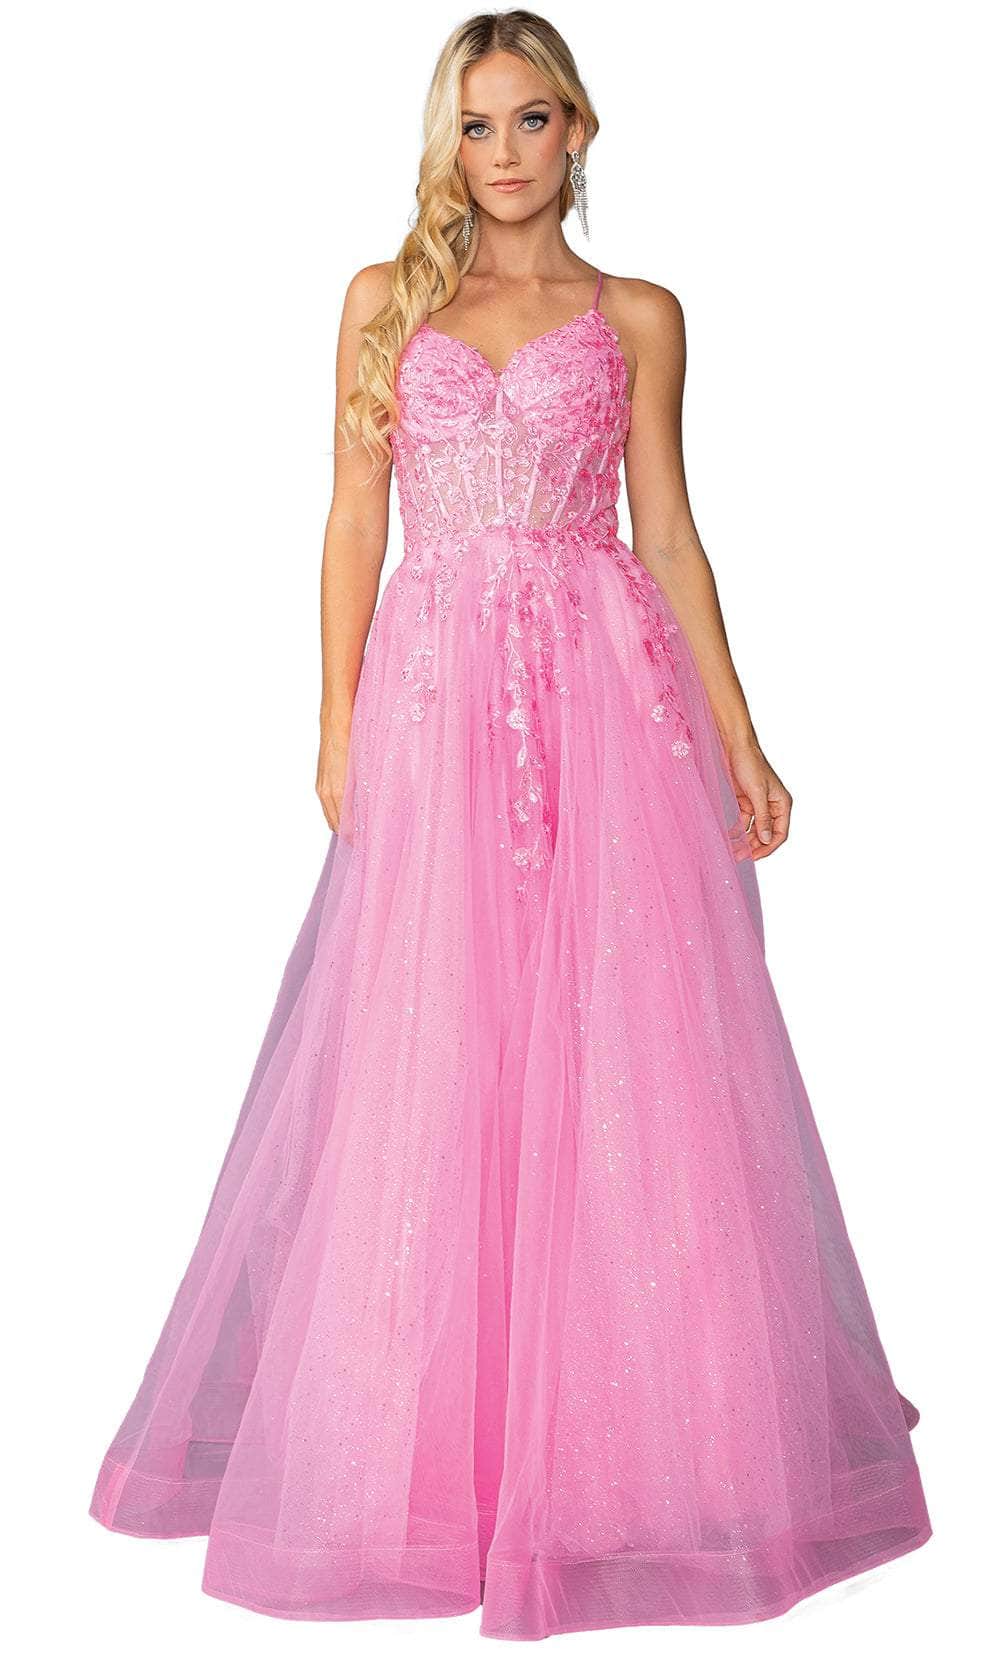 Image of Dancing Queen 4421 - Embroidered Sleeveless Ballgown